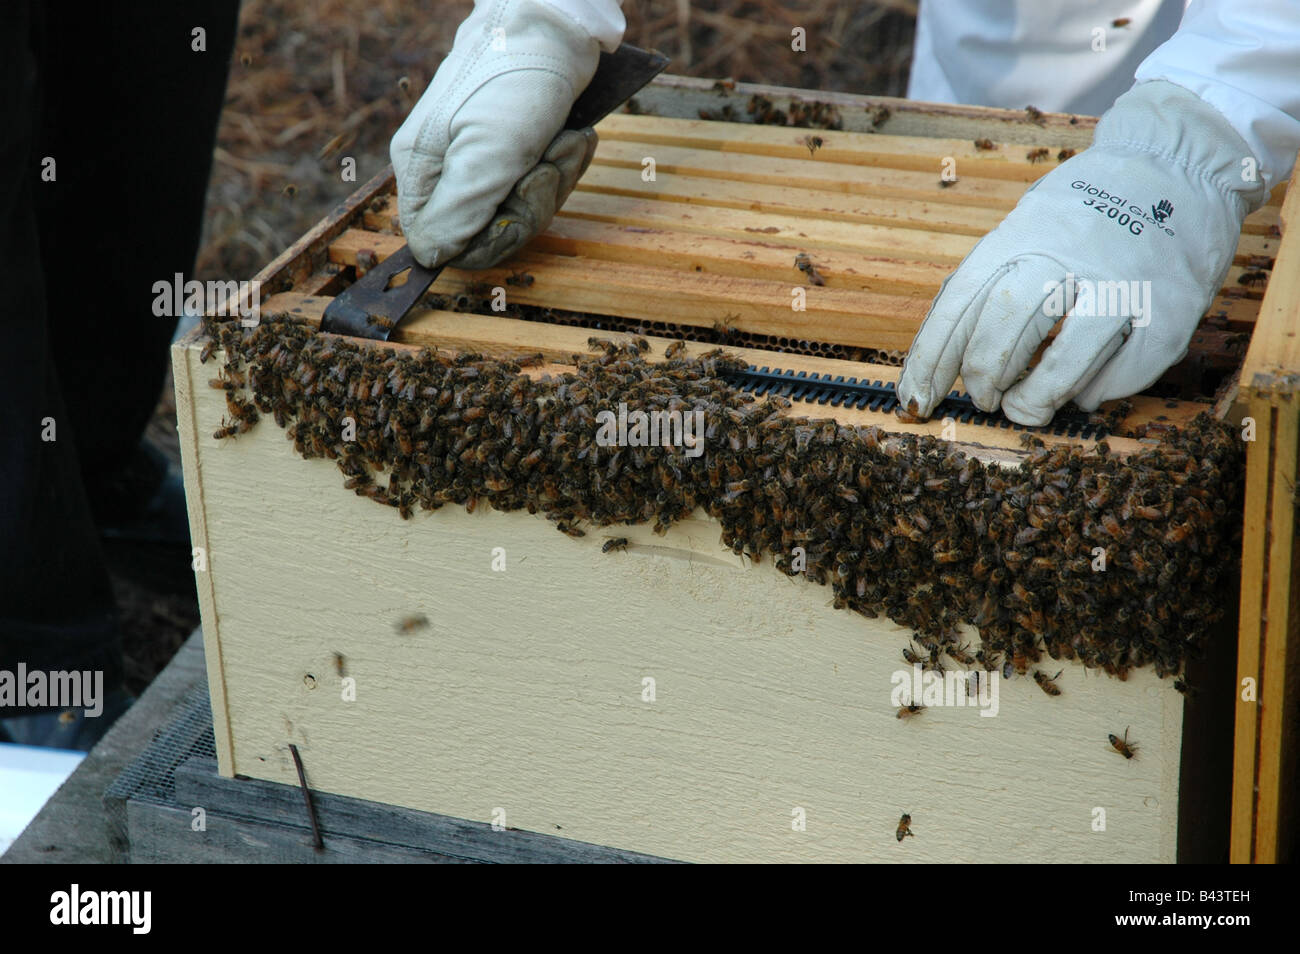 Removing a frame from a beehive. Stock Photo